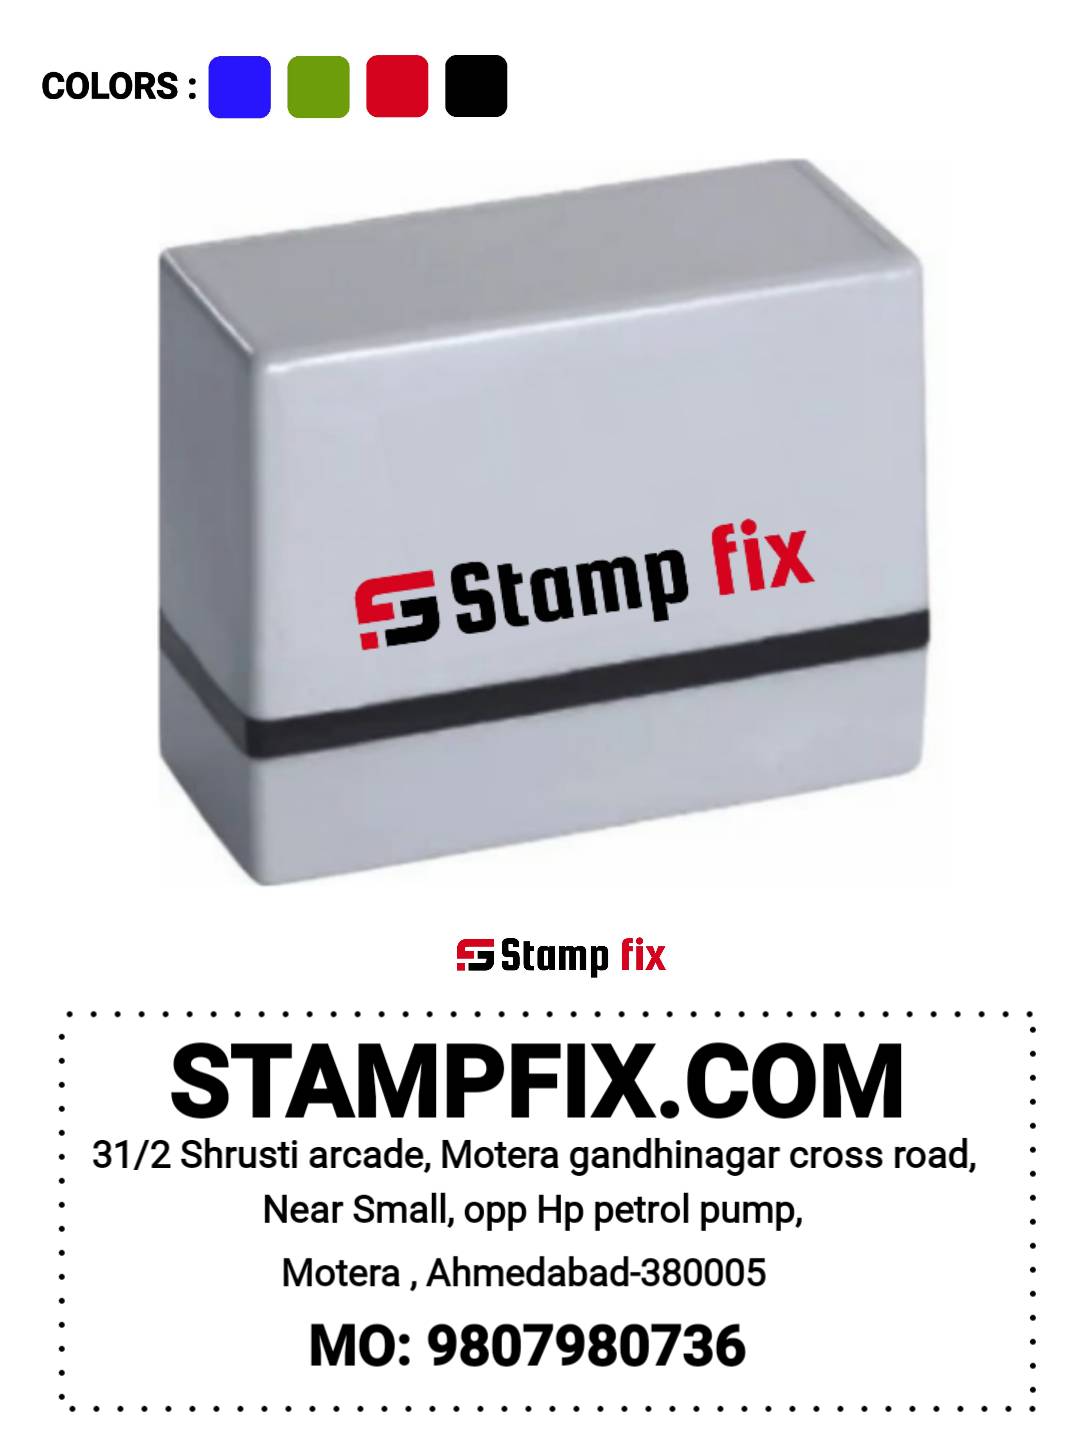 Pre Ink Address Stamp by StampFix, a self-inking stamp with high-quality impressions
in India, nylon stamp, rubber stamp, pre ink stamp, polymer stamp, urgent stamp